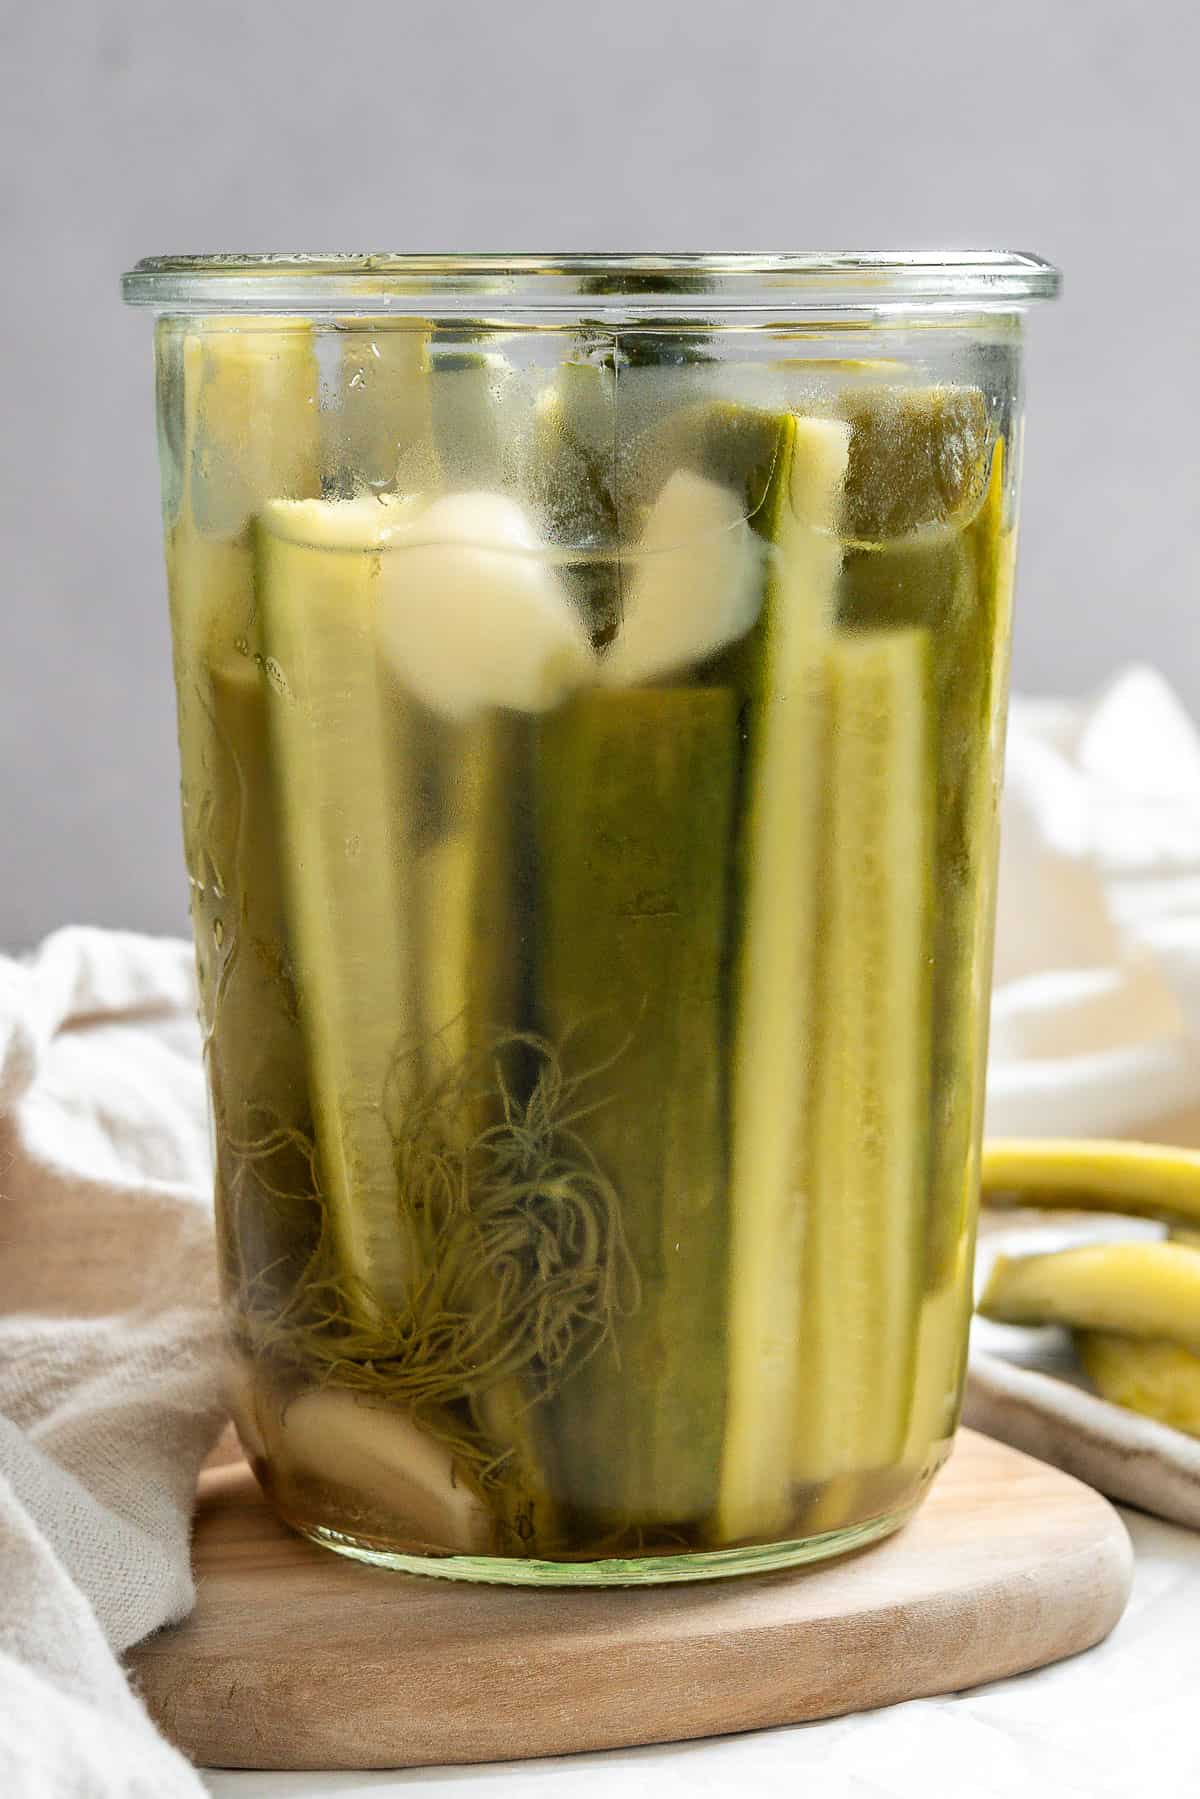 completed Quick Easy Refrigerator Pickles in a jar a،nst a white background